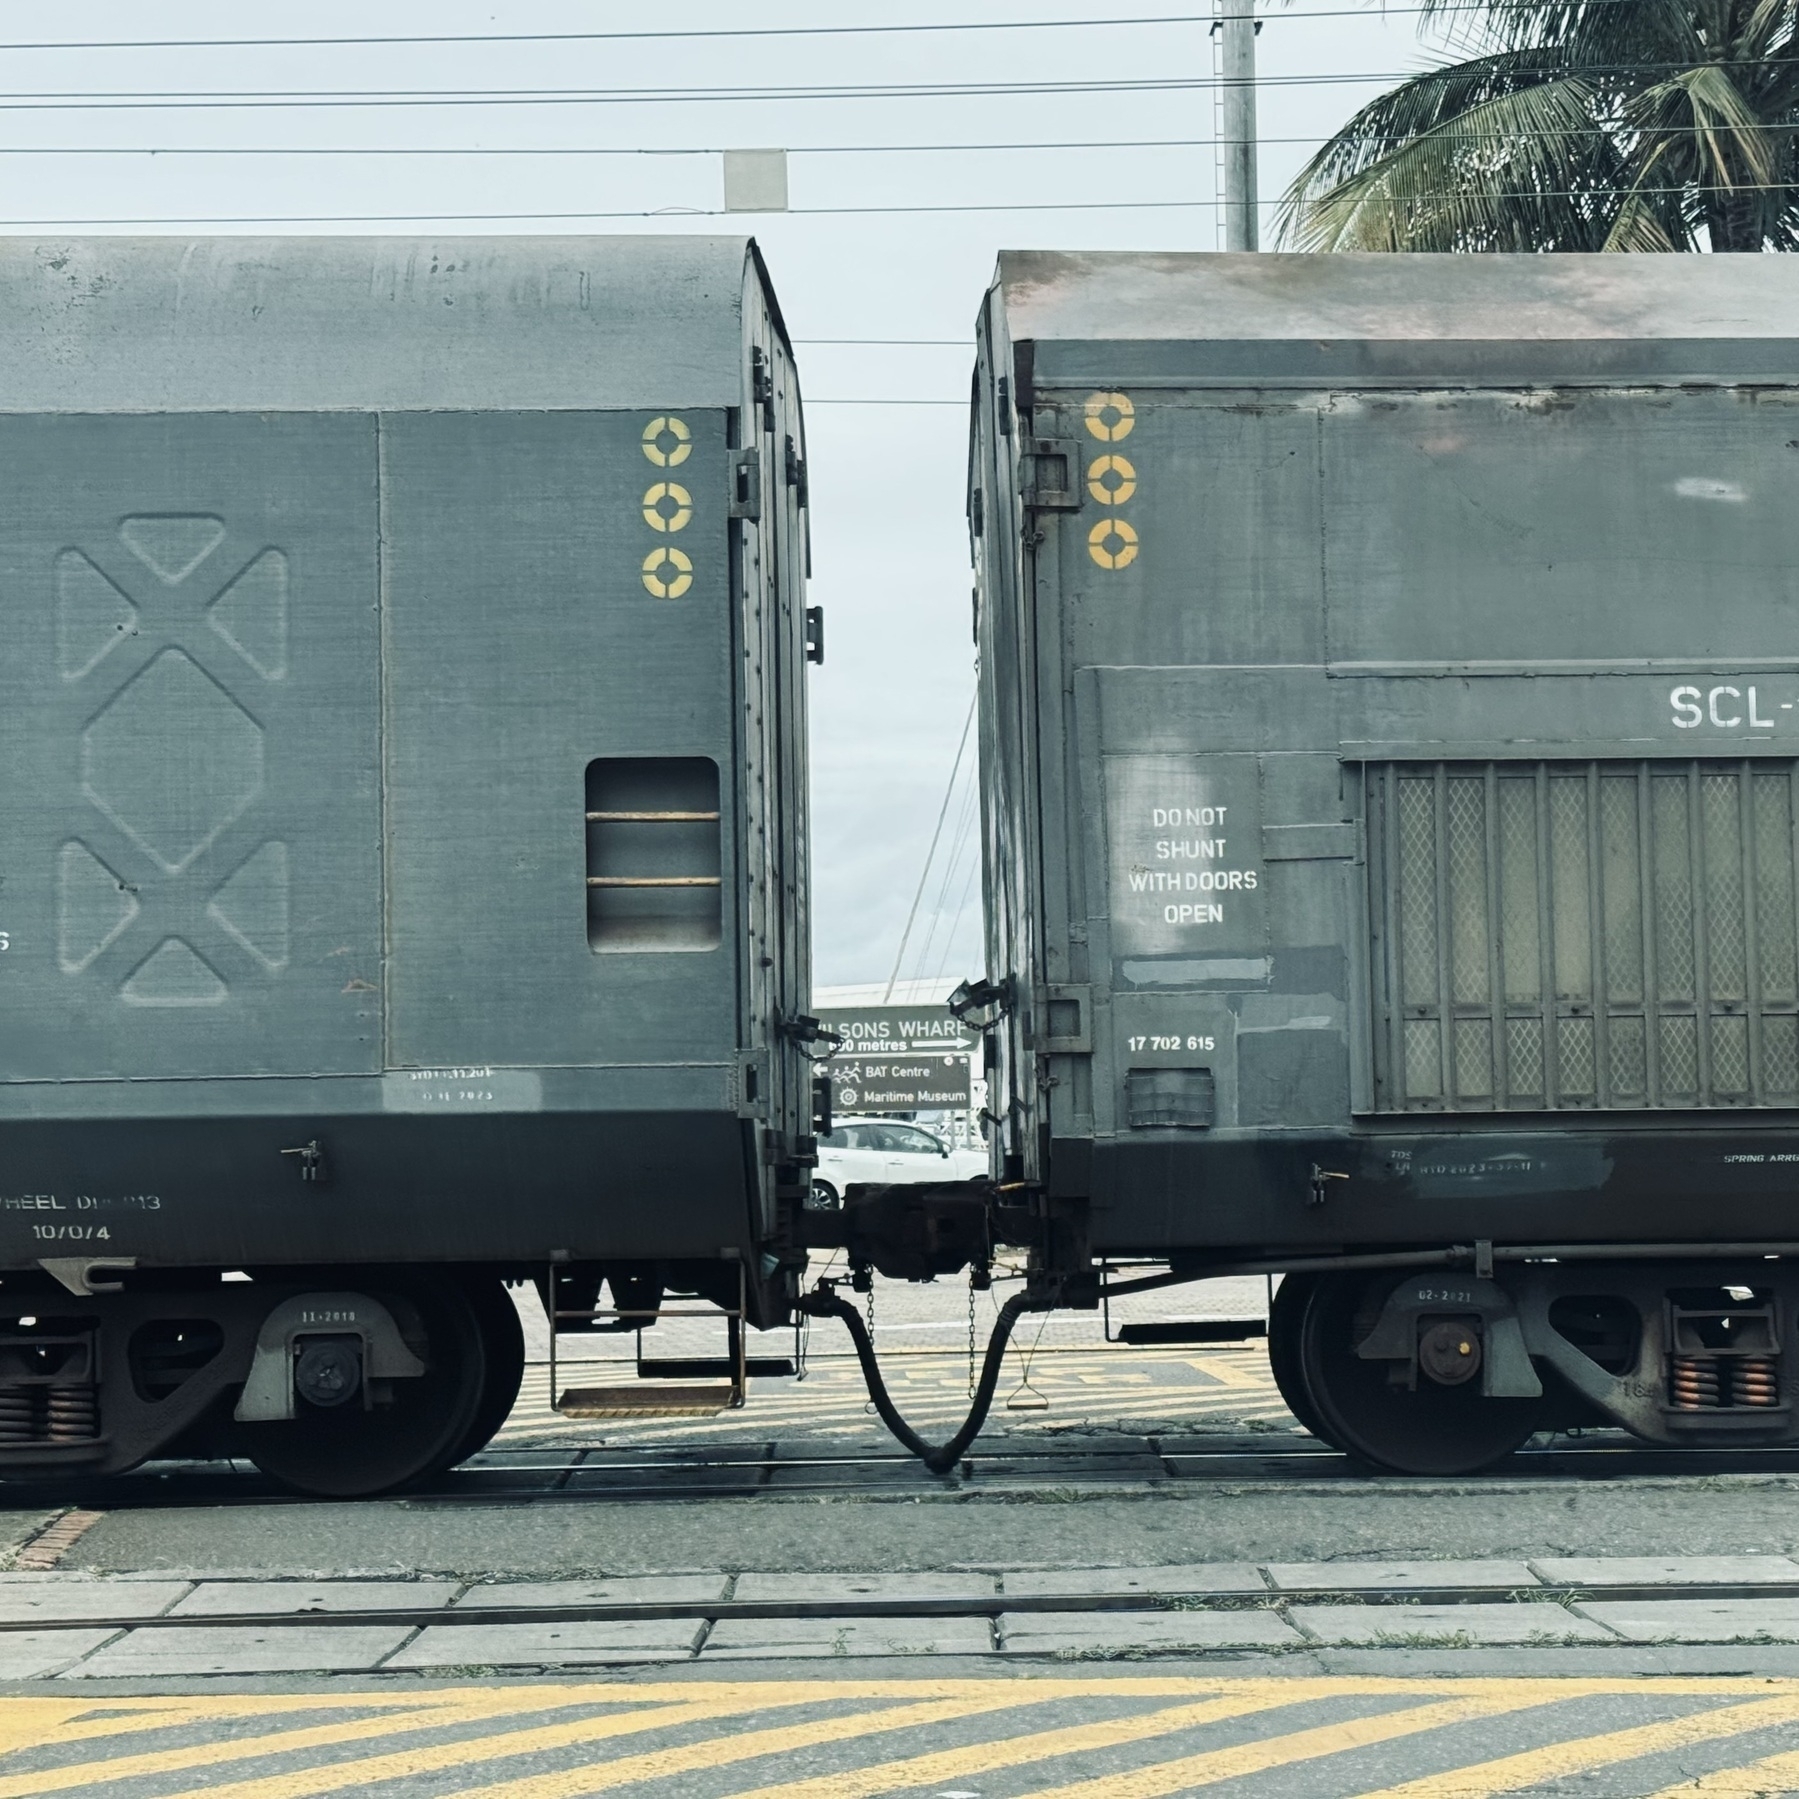 The ends of two covered train wagons on a level crossing, with a small gap between.